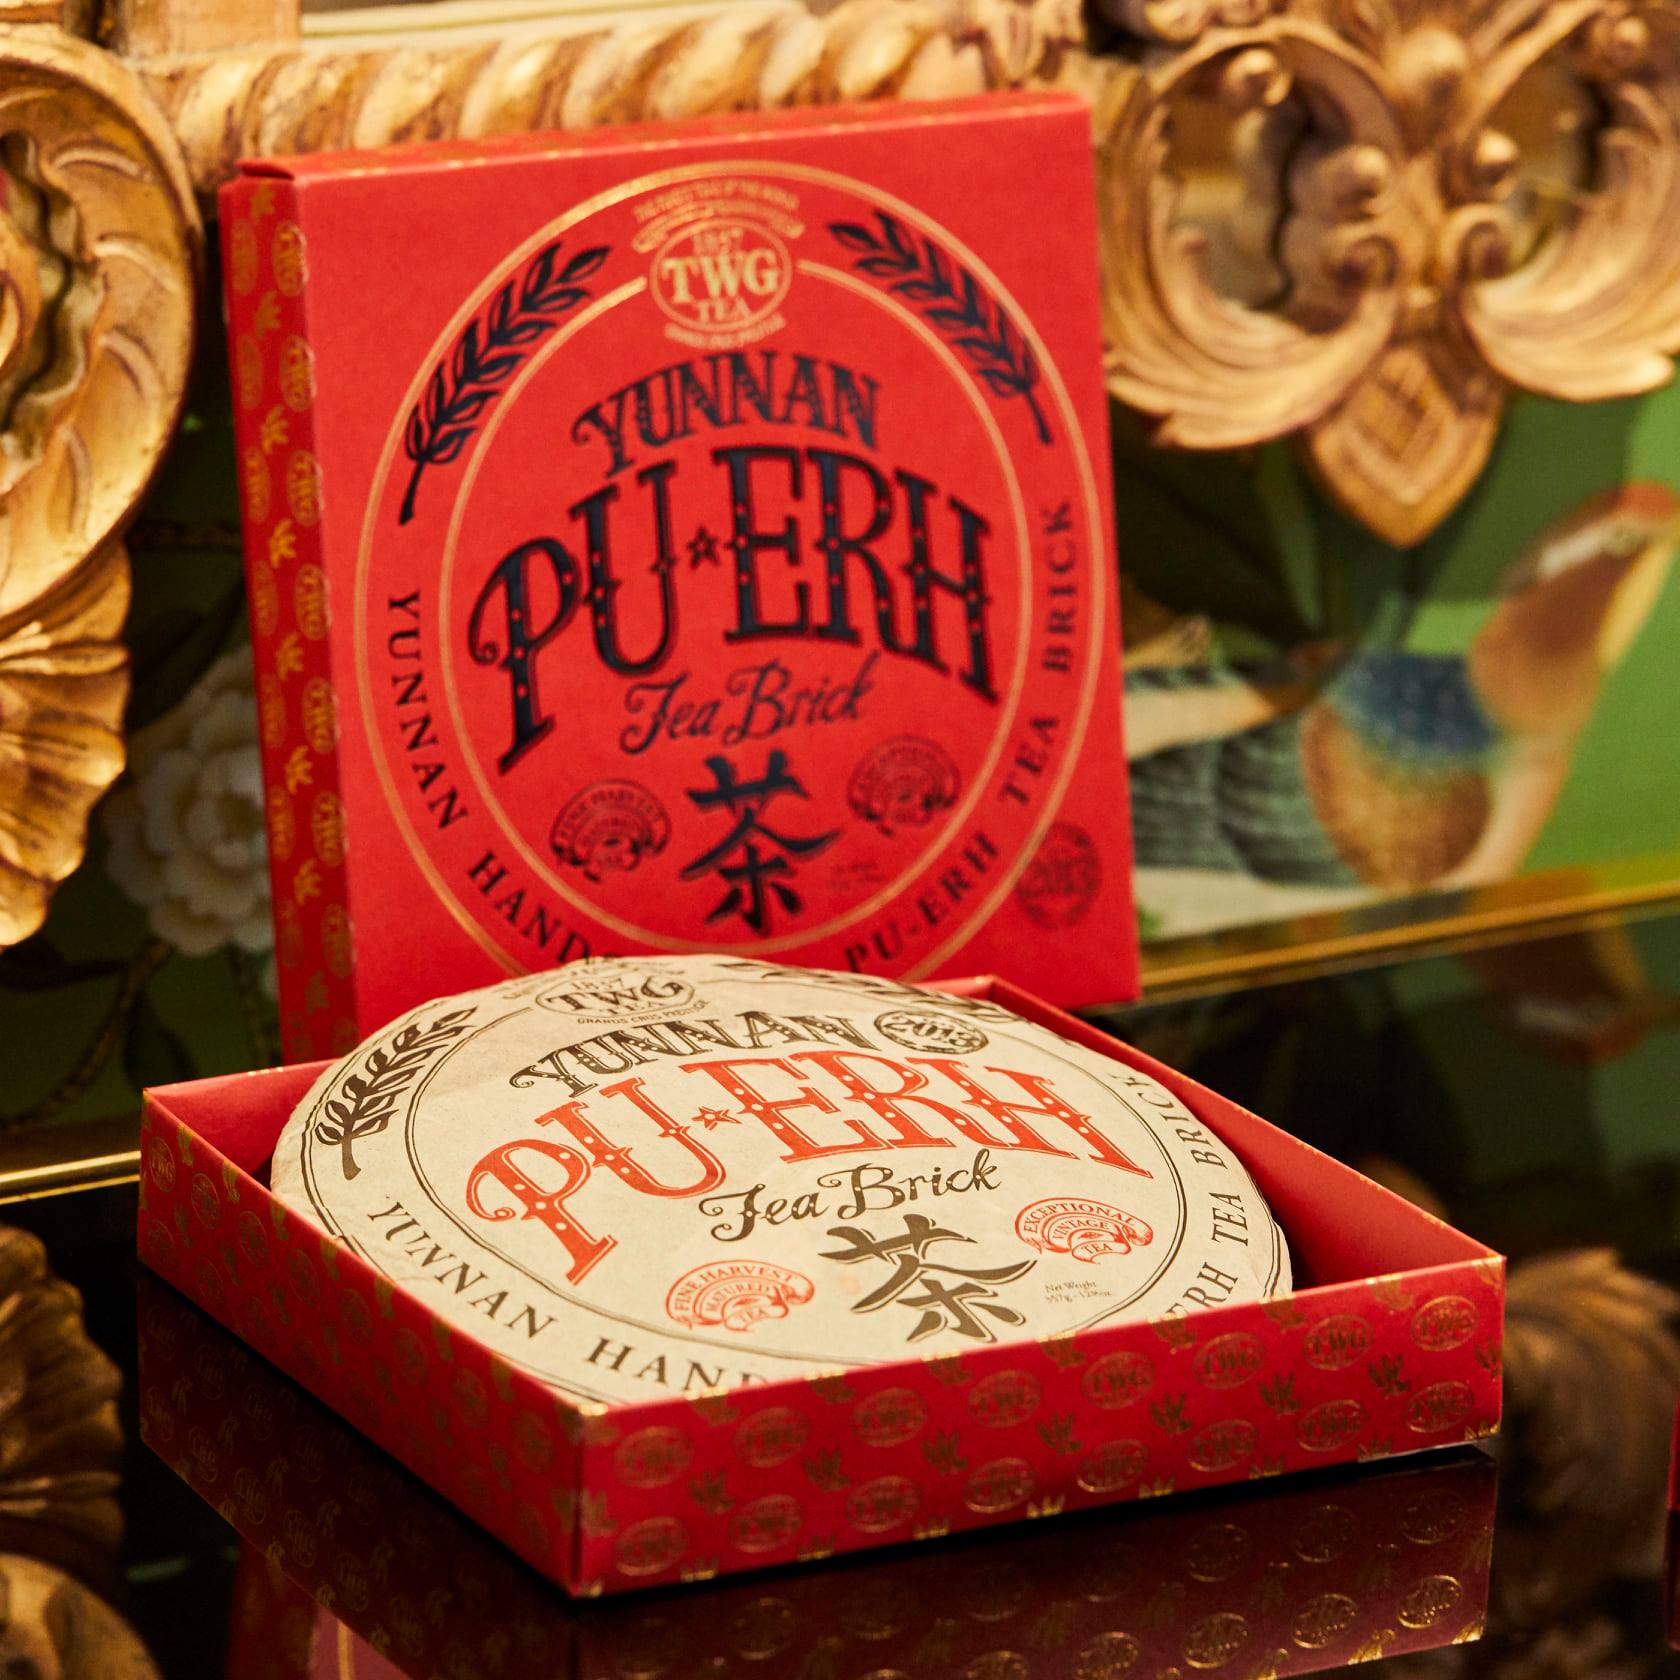 Tea appreciators will love this handmade Yunnan Pu-Erh Tea Brick, cultivated to order for TWG Tea in a traditional manner by the famed Meng Hai tea garden of Yunnan. Renowned for its refreshing and tonic attributes, this Pu-Erh has the unique particularity of improving with age. Packaged in a luxurious matte red and gold gift box adorned with a silk ribbon, this ancient tea craft is a perfect gift for the Lunar New Year season. Shop now at TWGTea.Com! #TWGTeaOfficial